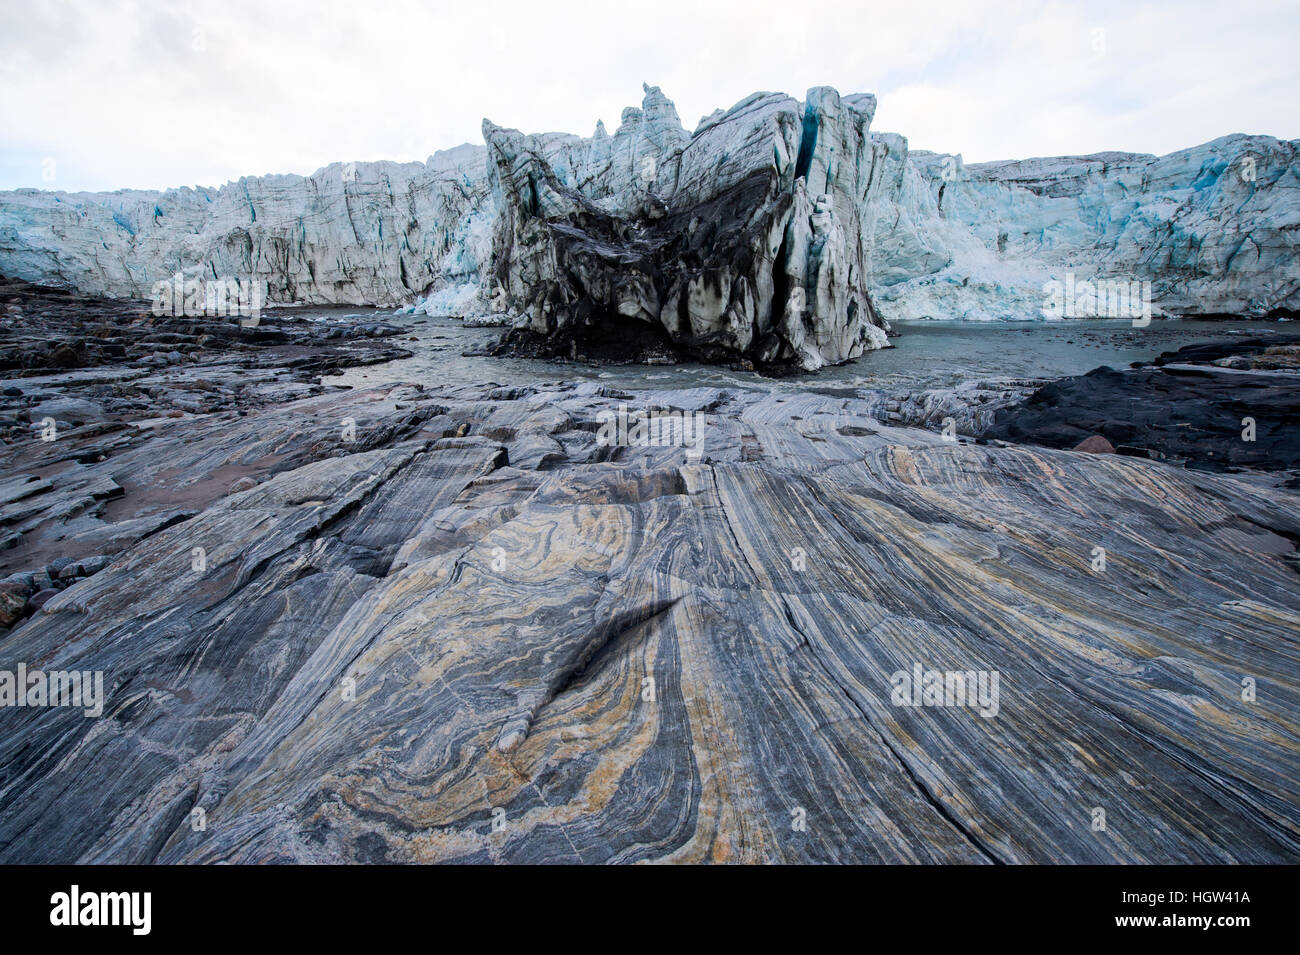 Striations carved into the bedrock by ice erosion as a glacier receded. Stock Photo